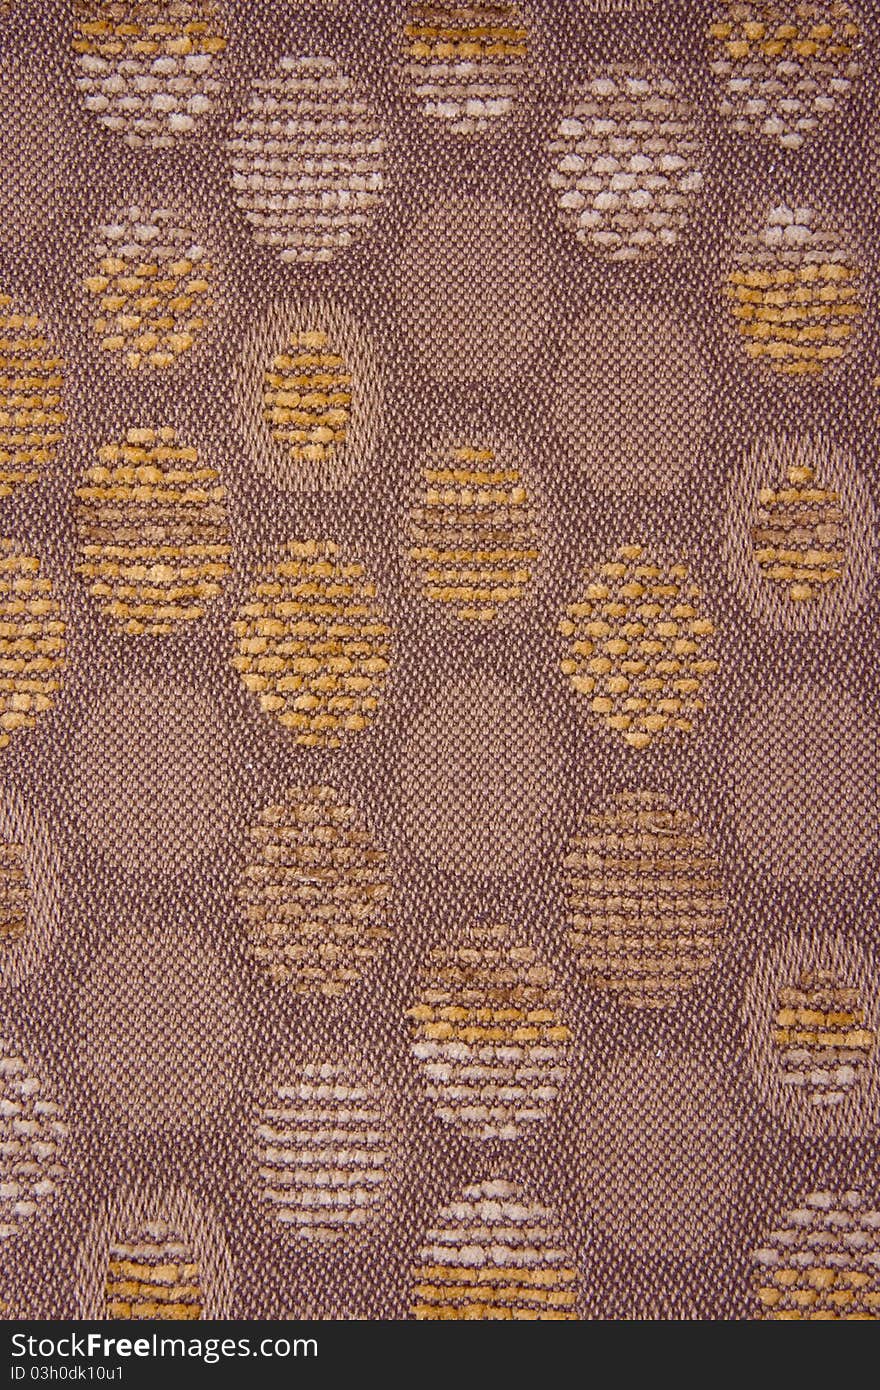 Brown Upholstery Textile Material with Yellow and Brown Circles. Brown Upholstery Textile Material with Yellow and Brown Circles